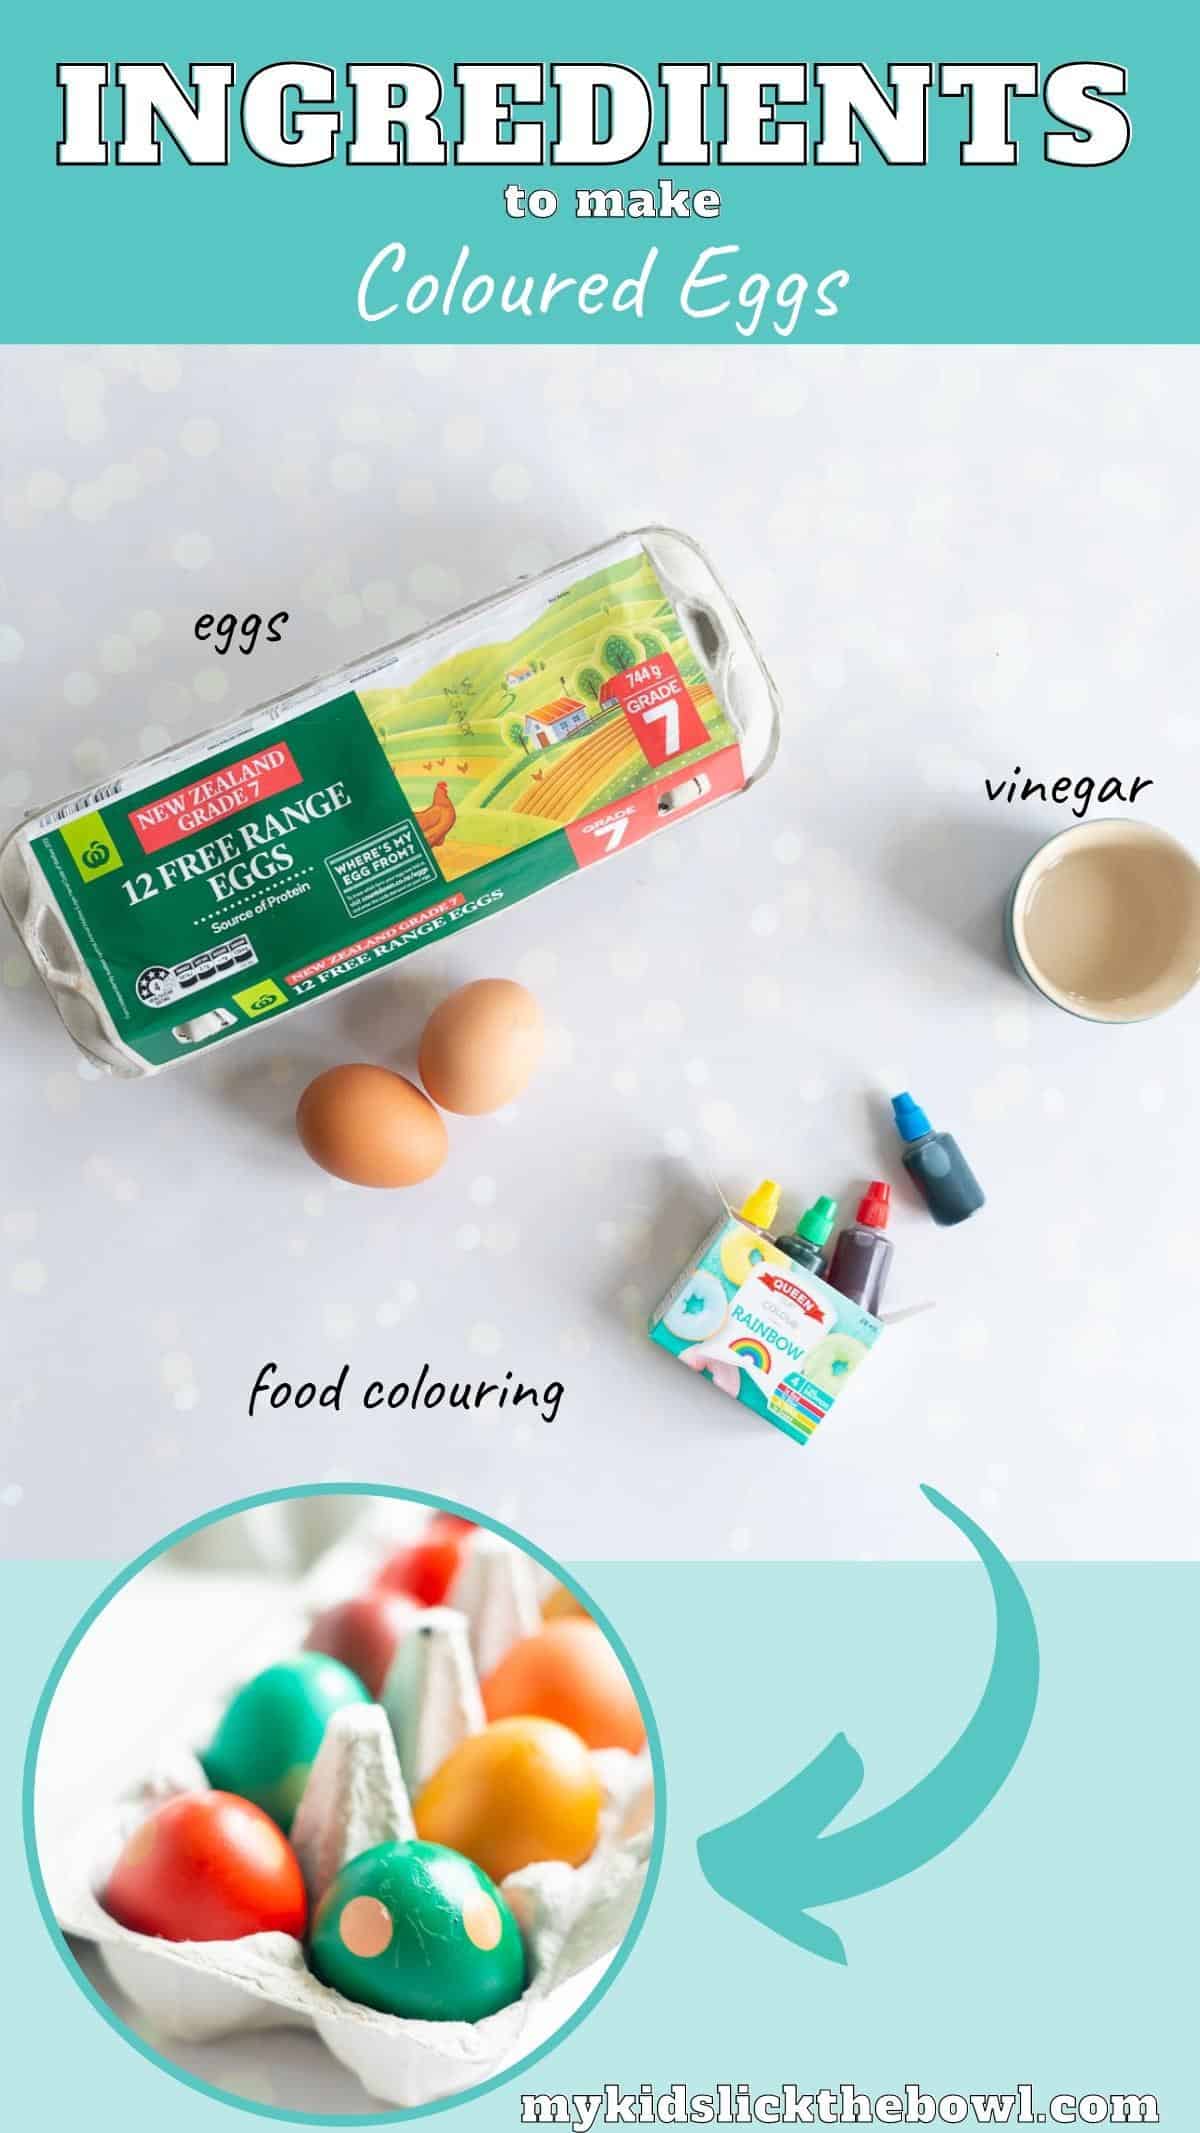 The ingredients to make coloured eggs laid out on a bench top with text overlay.